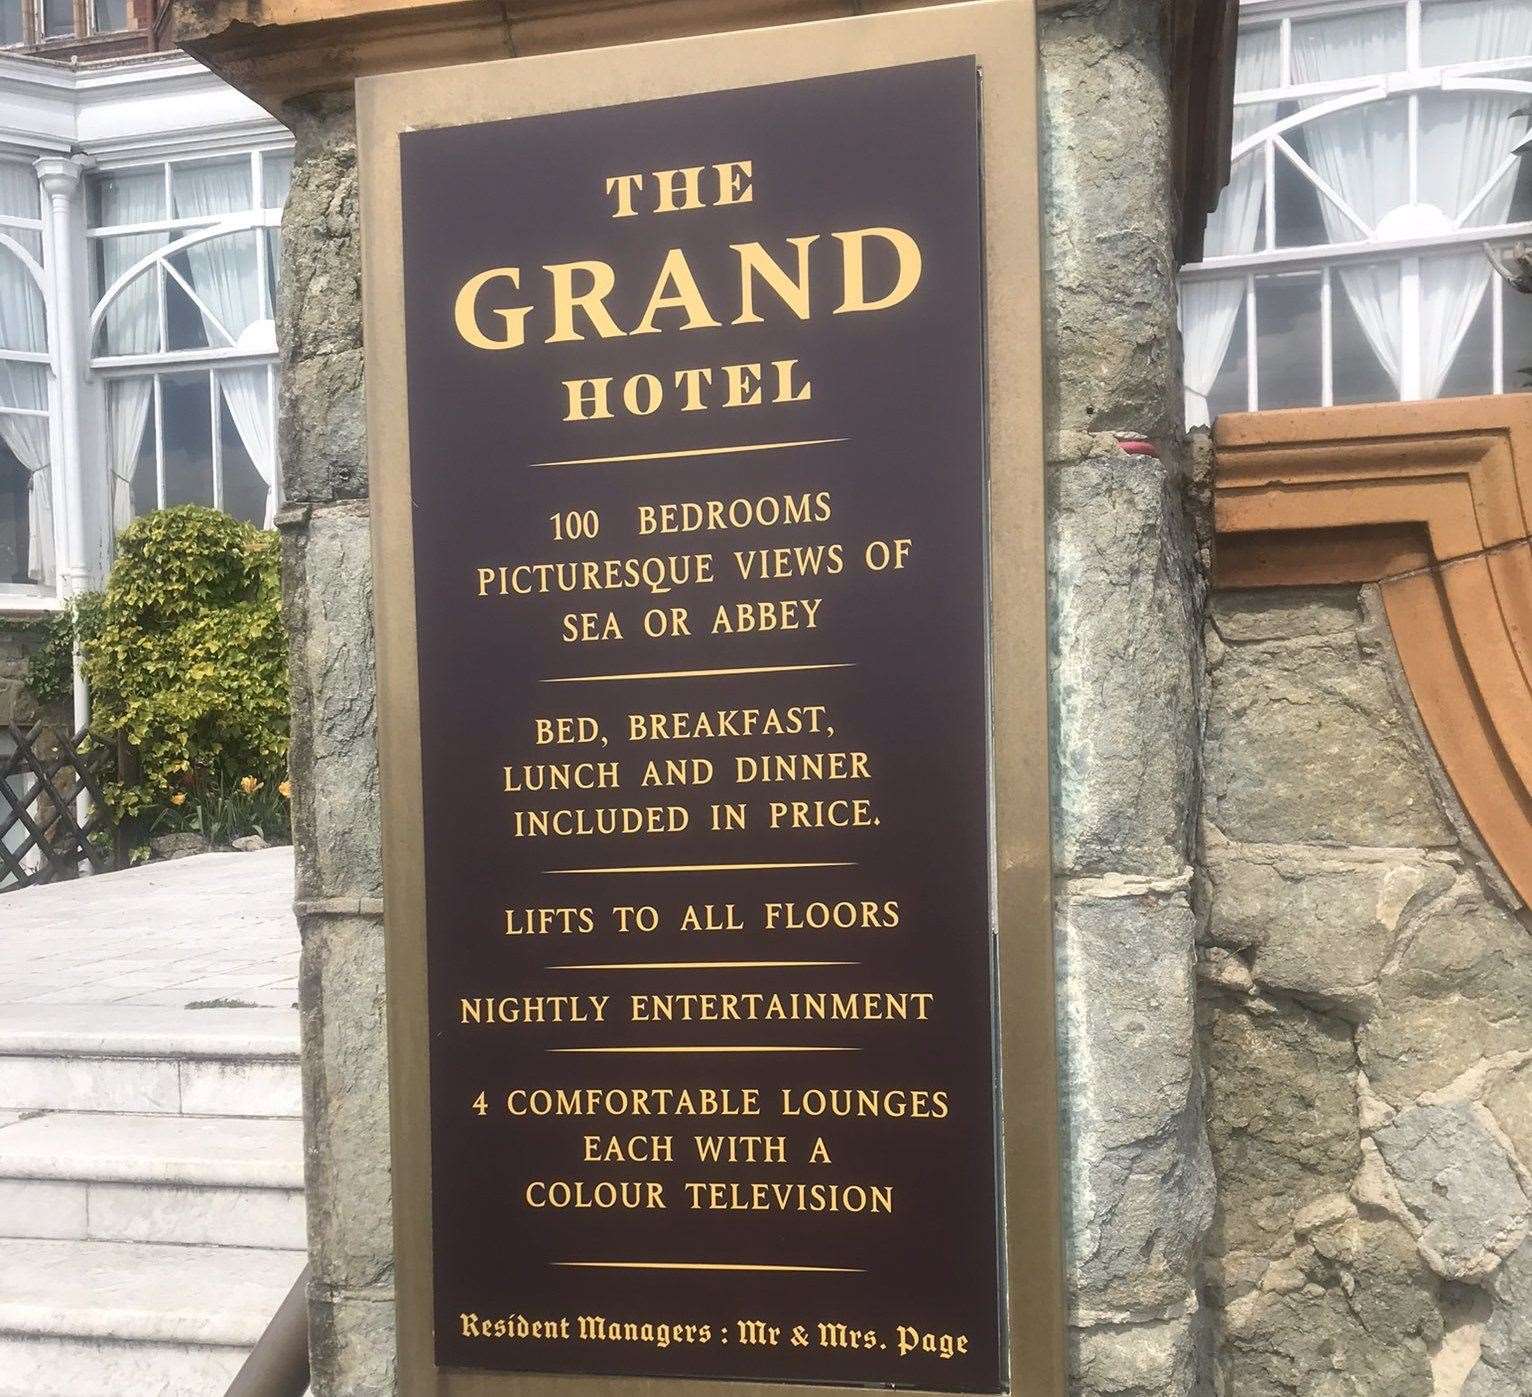 Another sign has been added to The Grand. Photo: Ian Everley